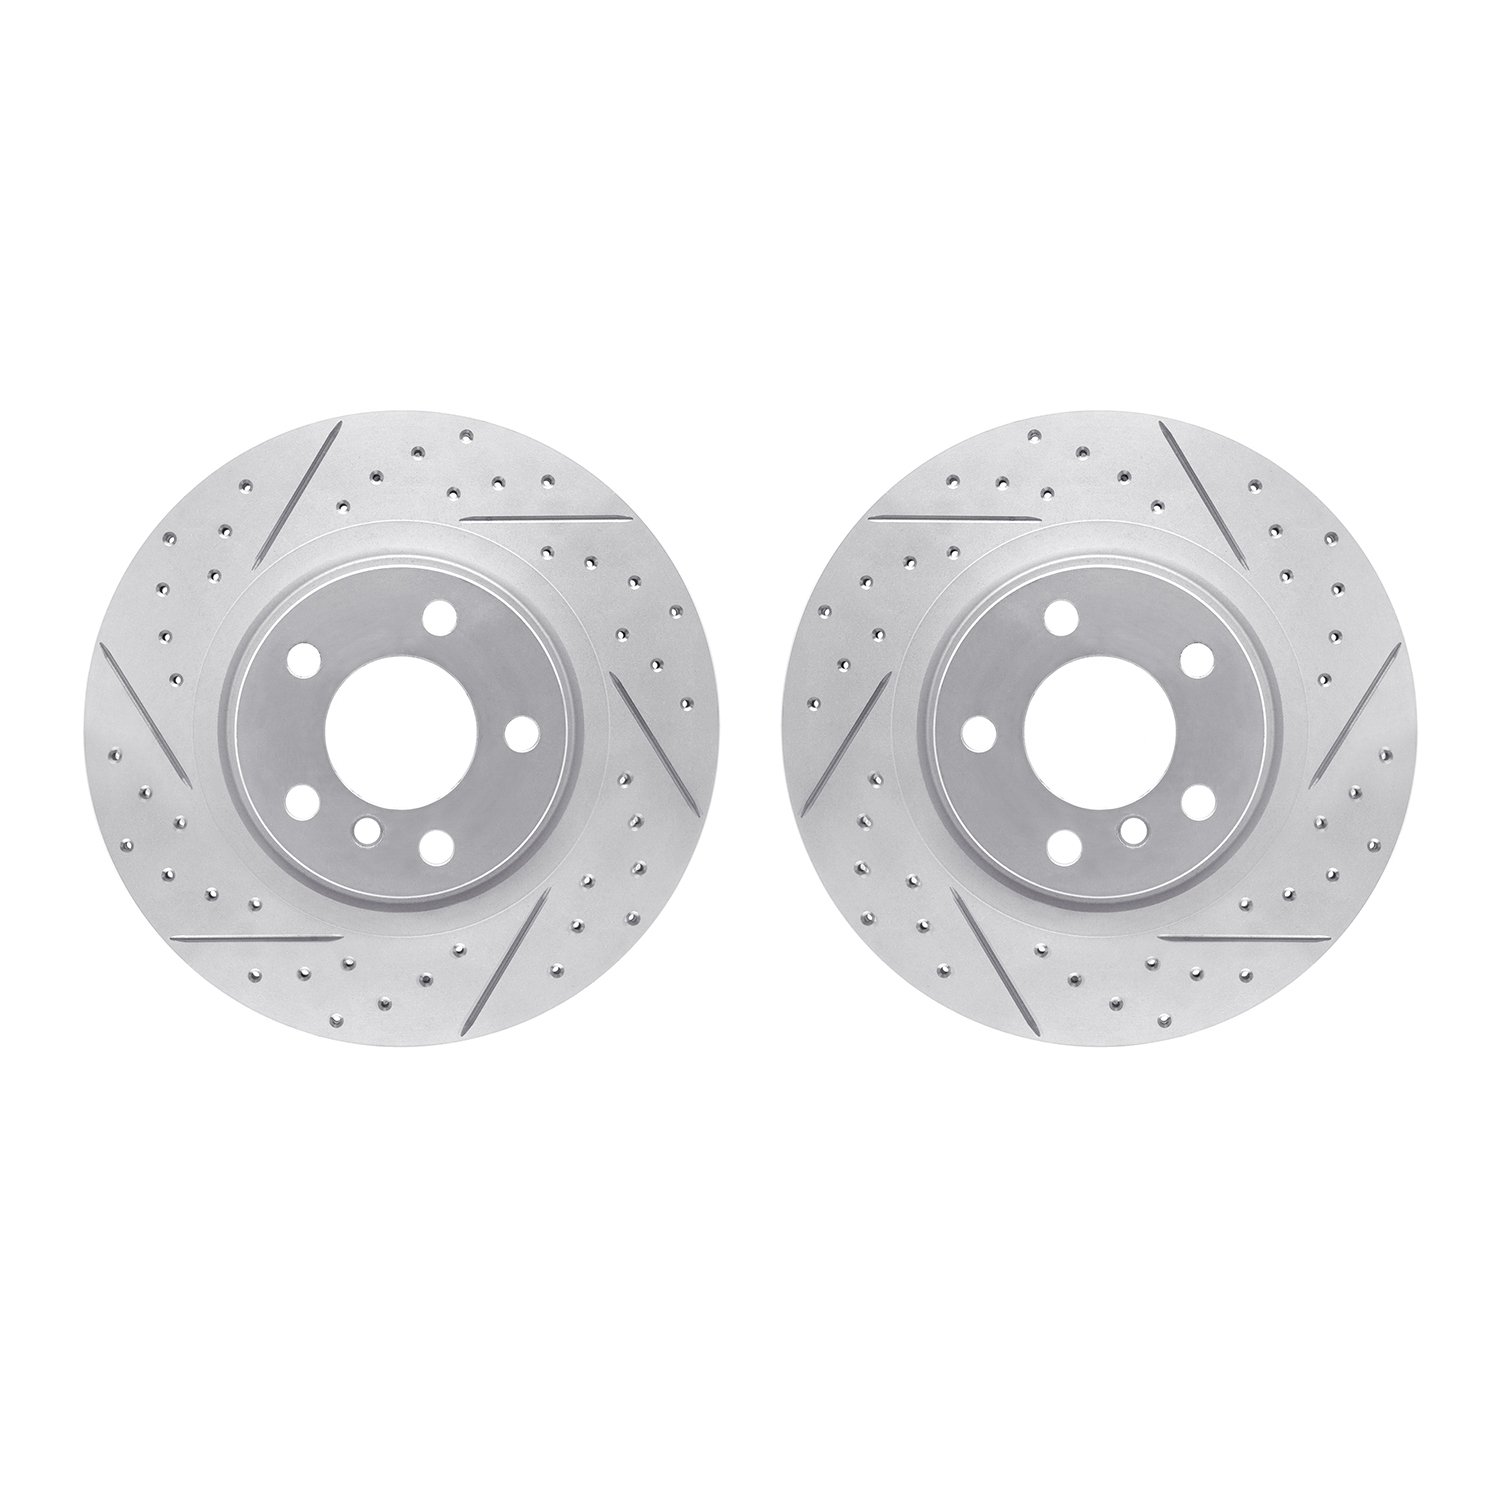 2002-31091 Geoperformance Drilled/Slotted Brake Rotors, 2011-2018 BMW, Position: Rear